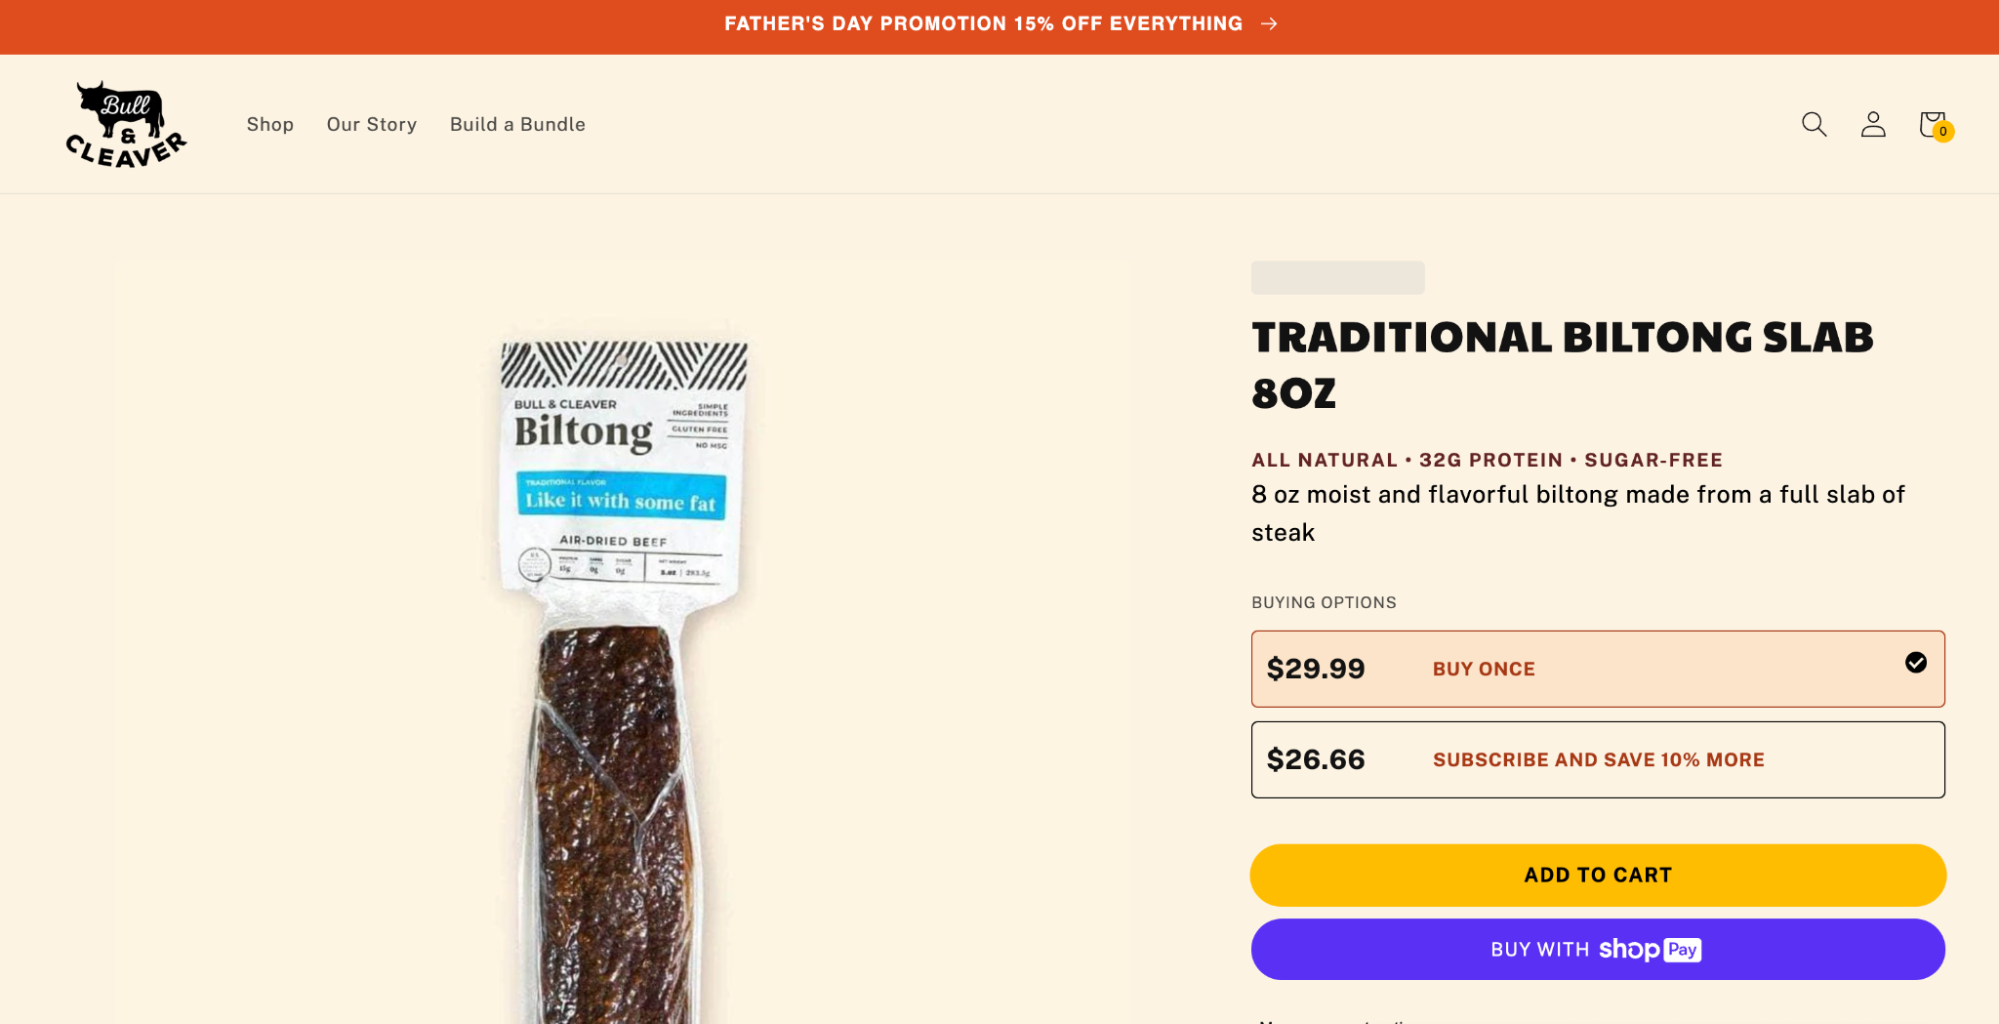 Bull & Cleaver’s product page for a biltong slab.